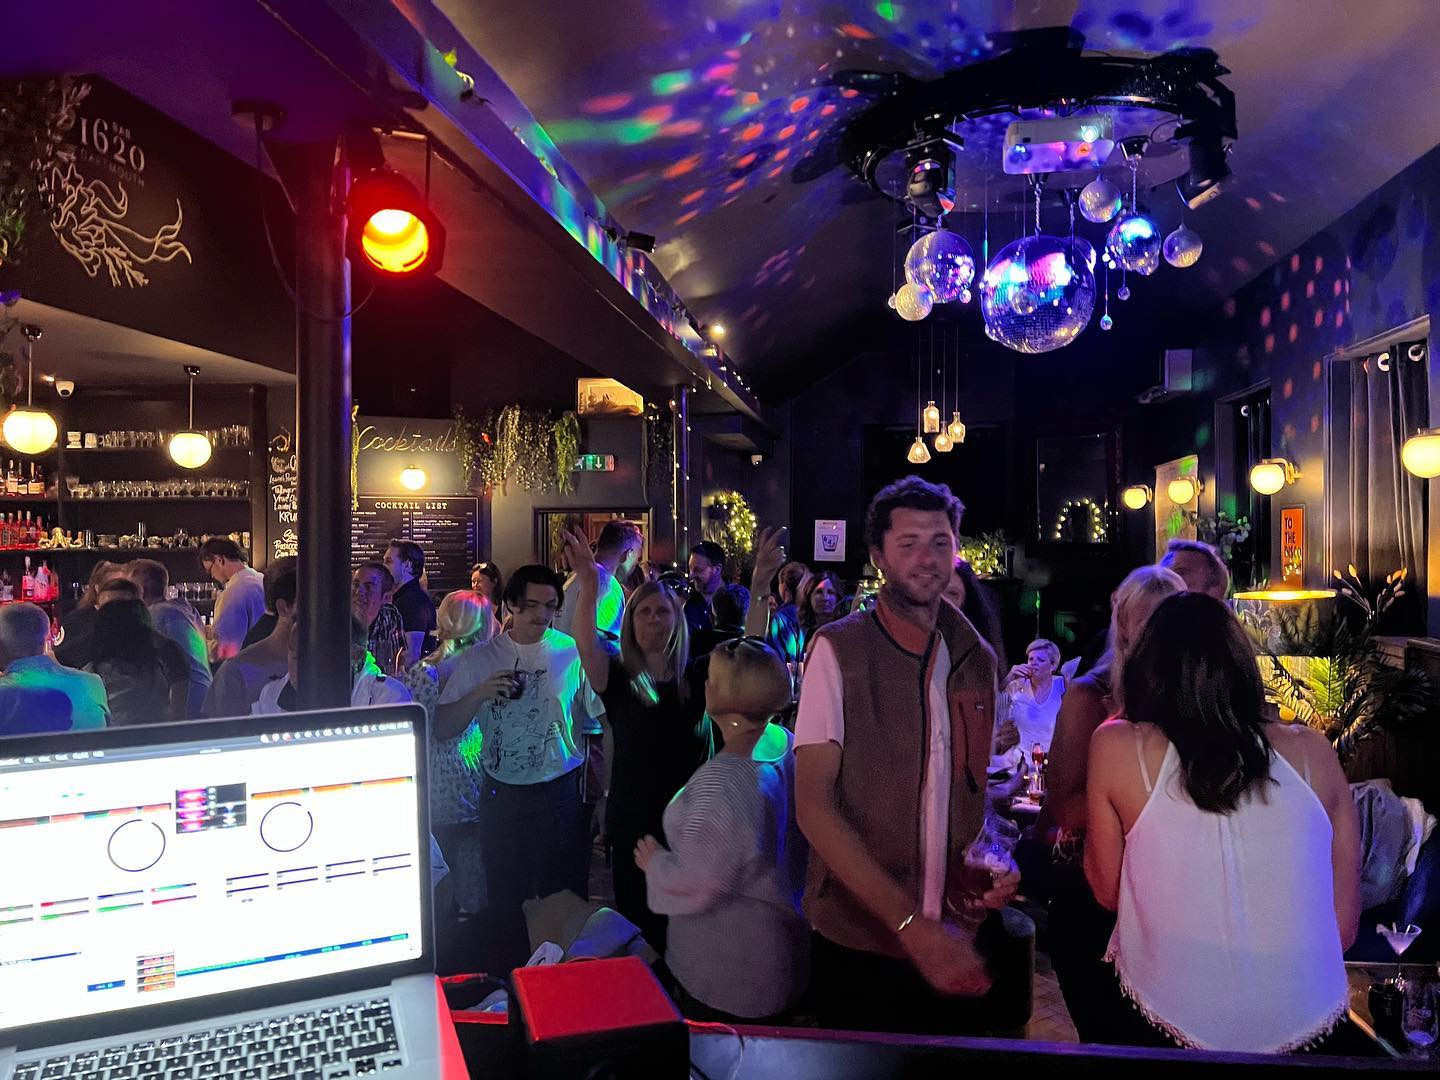 Really fun time playing at @1620dartmouth last night as part of @dartmusicfest and a superb bar and crowd too. Thanks for having me and hope to be back again soon. 
#dj #djing #housemusic #pioneerdj